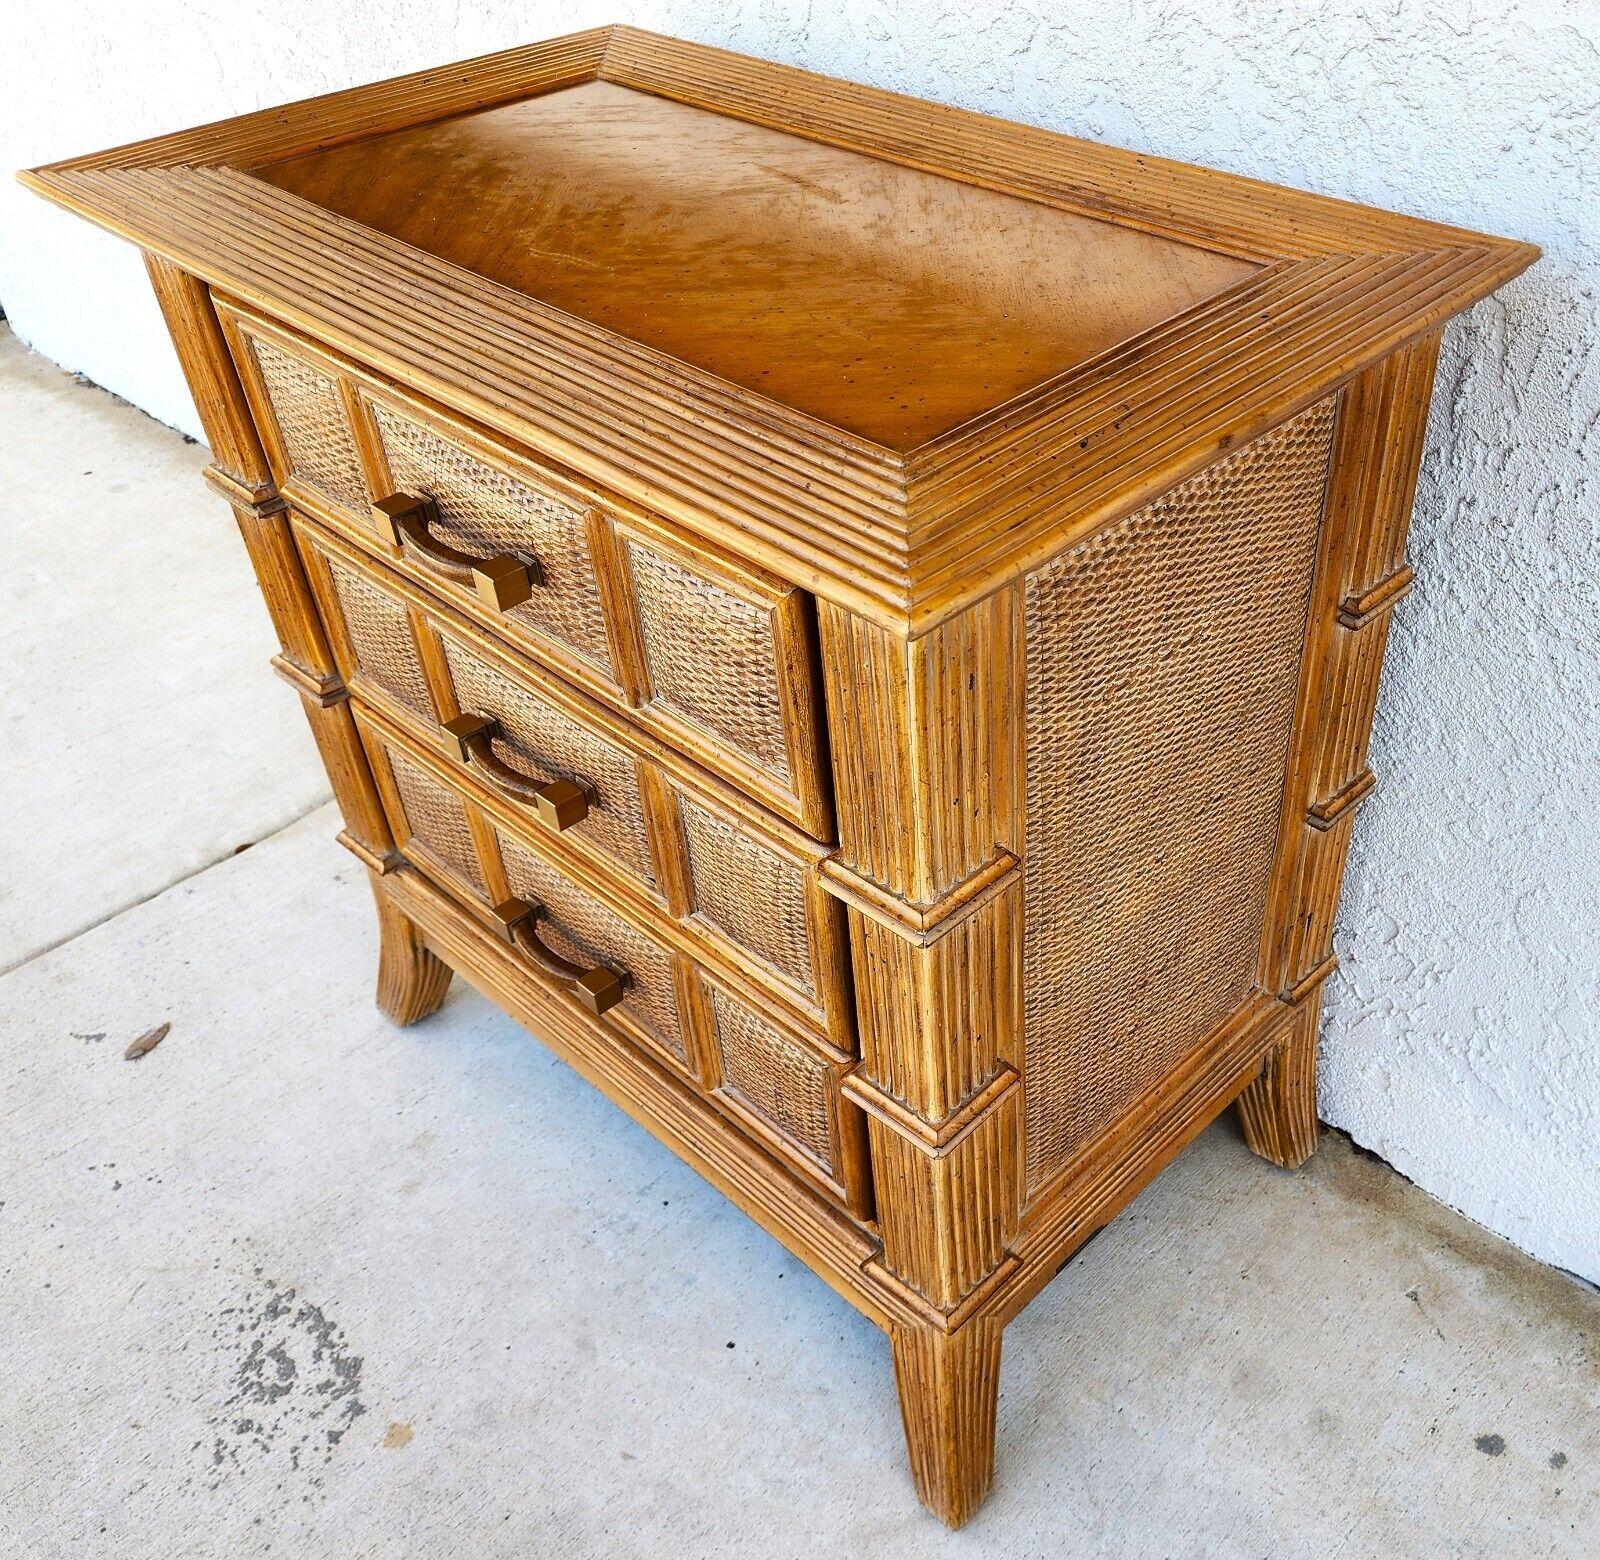 For FULL item description click on CONTINUE READING at the bottom of this page.

Offering One Of Our Recent Palm Beach Estate Fine Furniture Acquisitions Of A 
Boho Bamboo Wicker Nightstand Chest by Lexington
Handles are Brass and